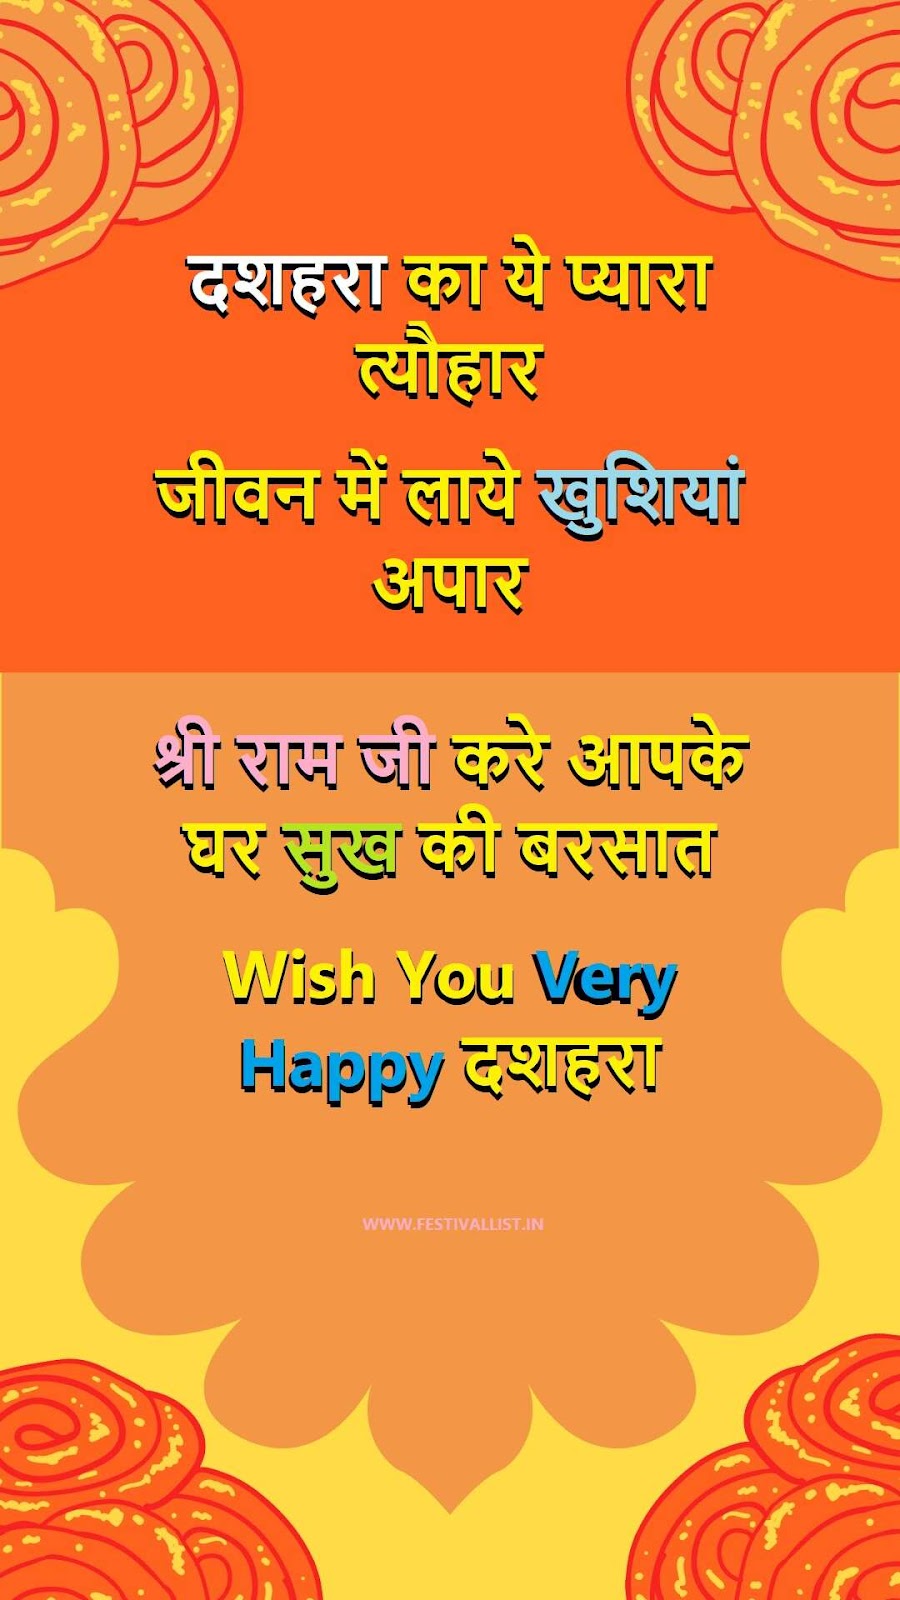 Best Quotes on Dussehra in Hindi